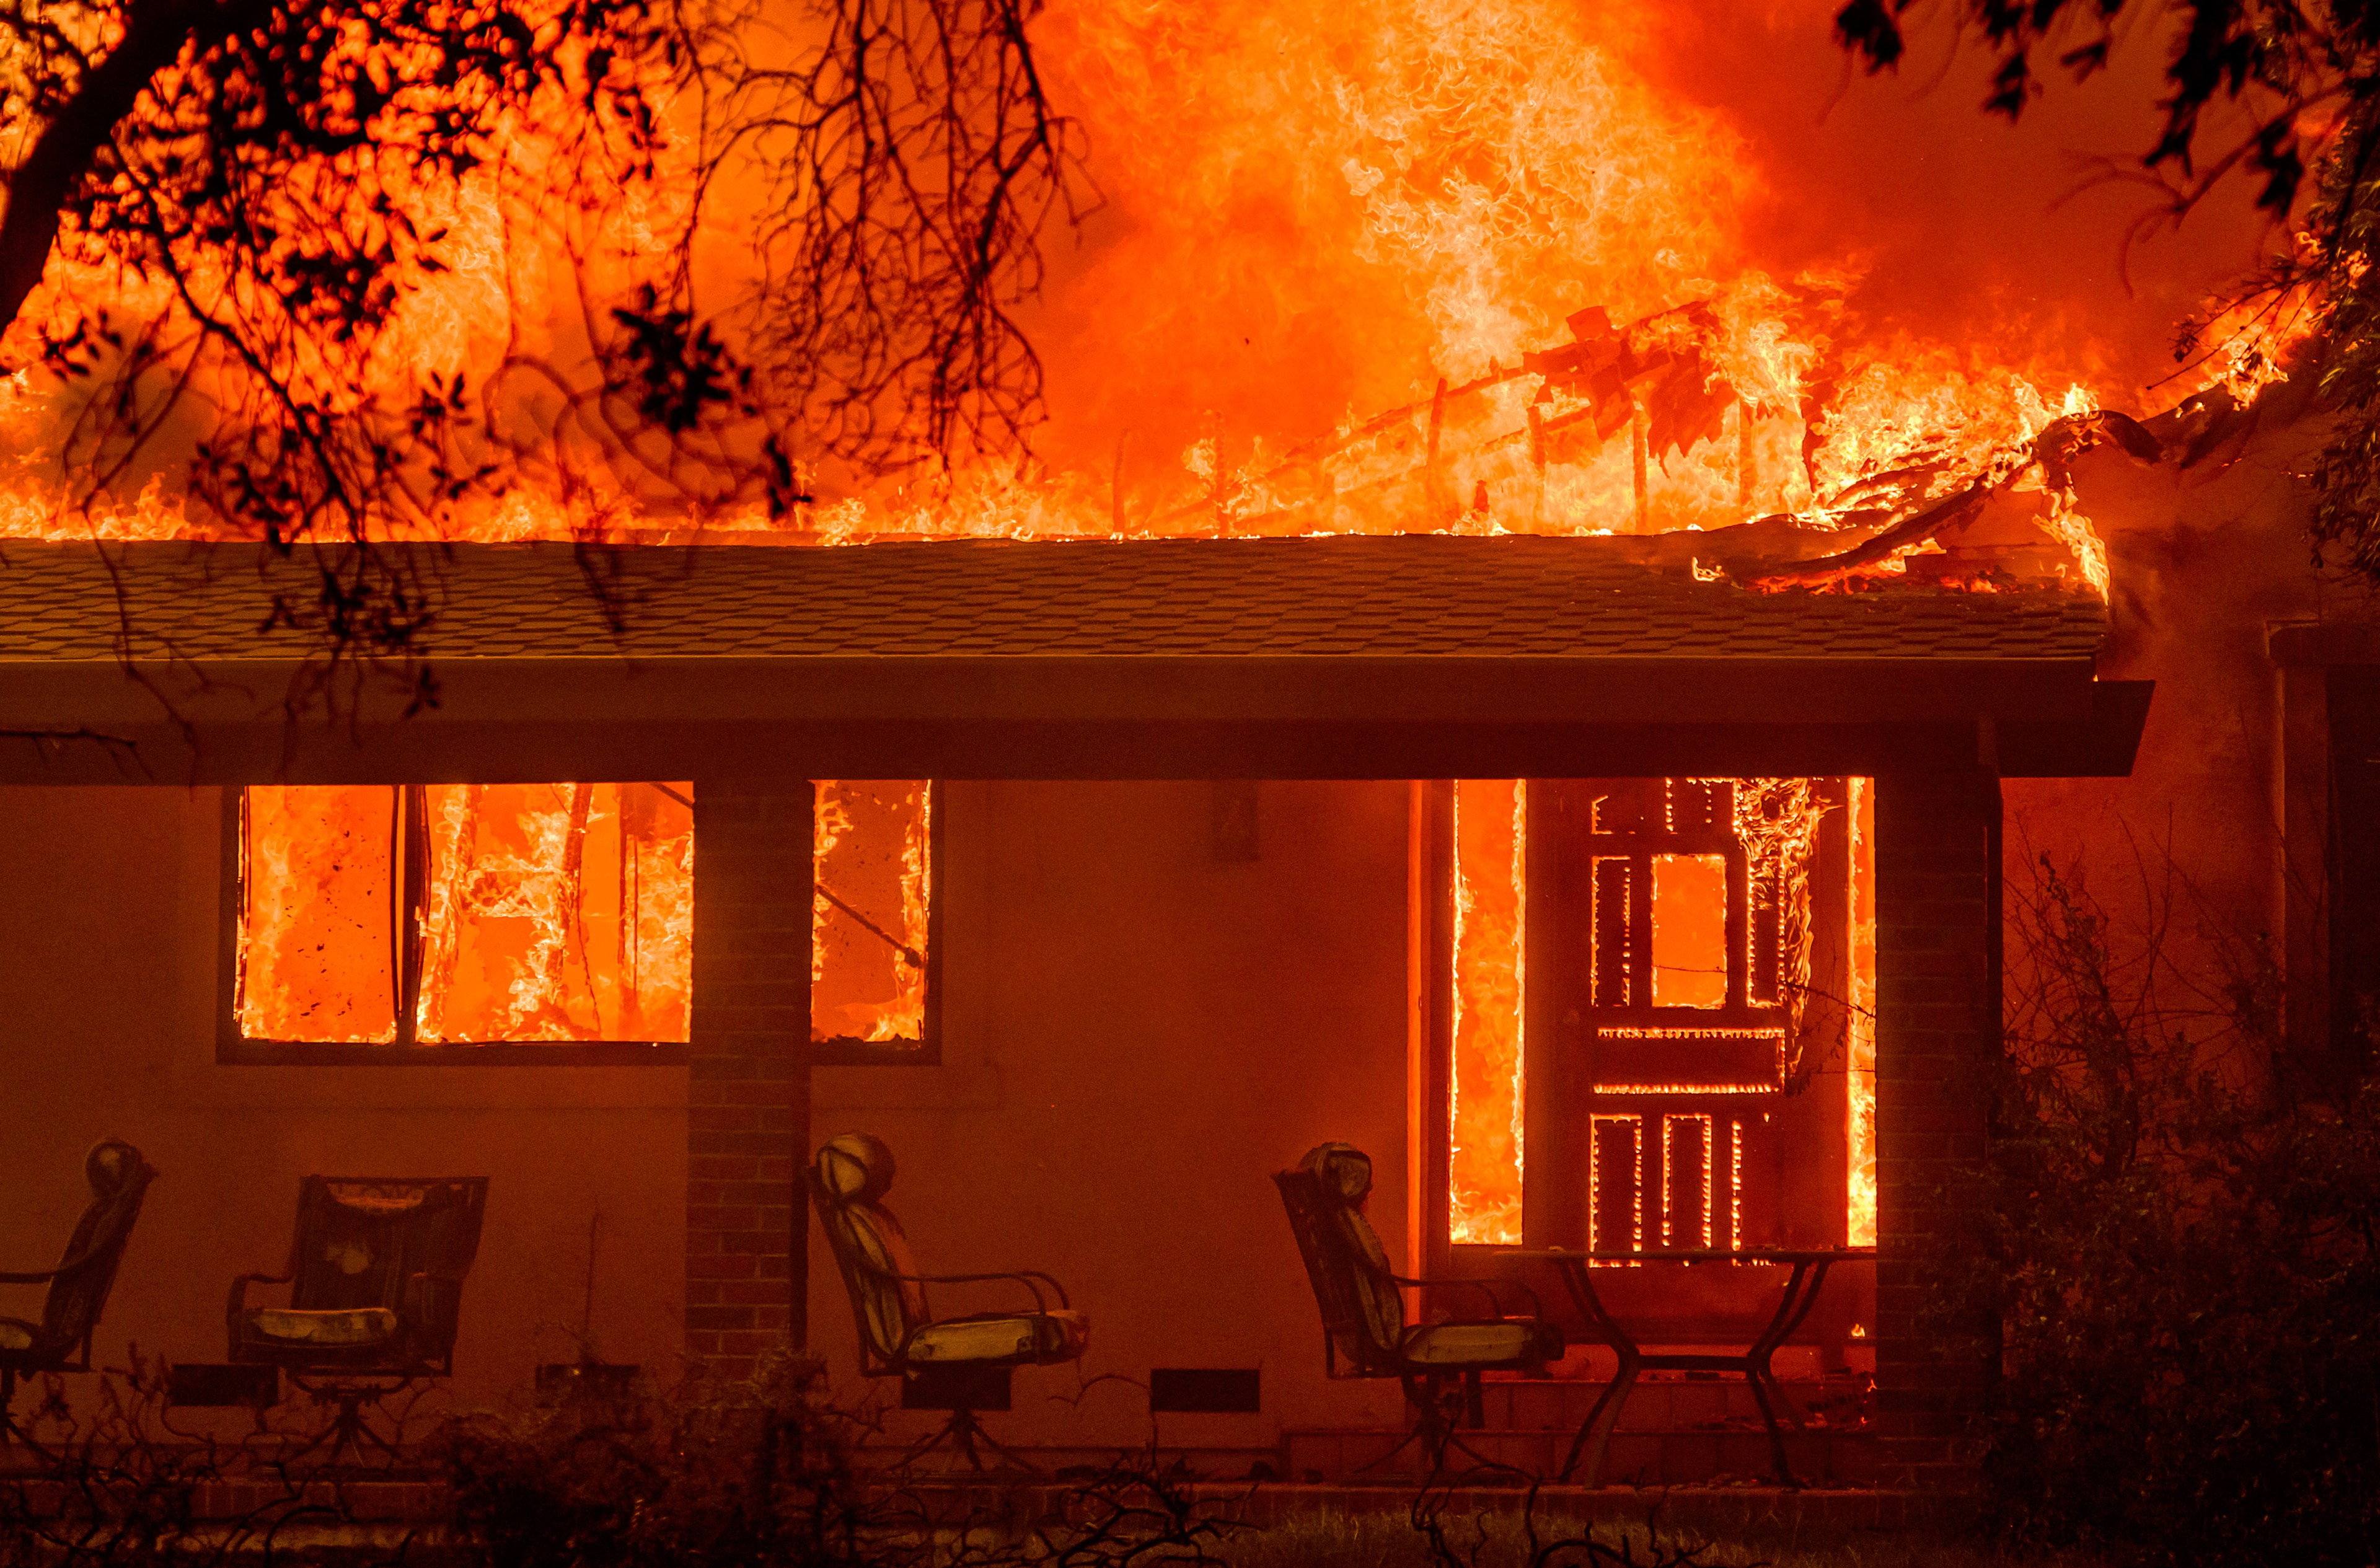 A house is engulfed in intense flames, with the roof and windows ablaze. Outdoor furniture is visible on a porch which has not yet caught fire. Tree branches frame the scene.